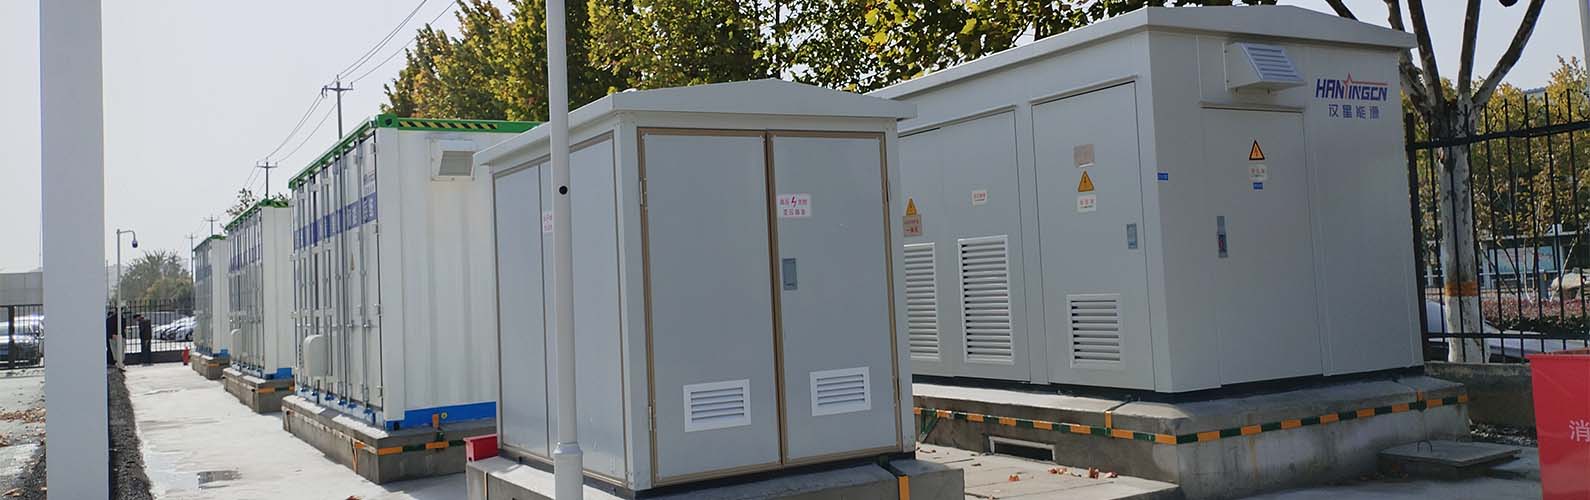 distributed energy storage power station